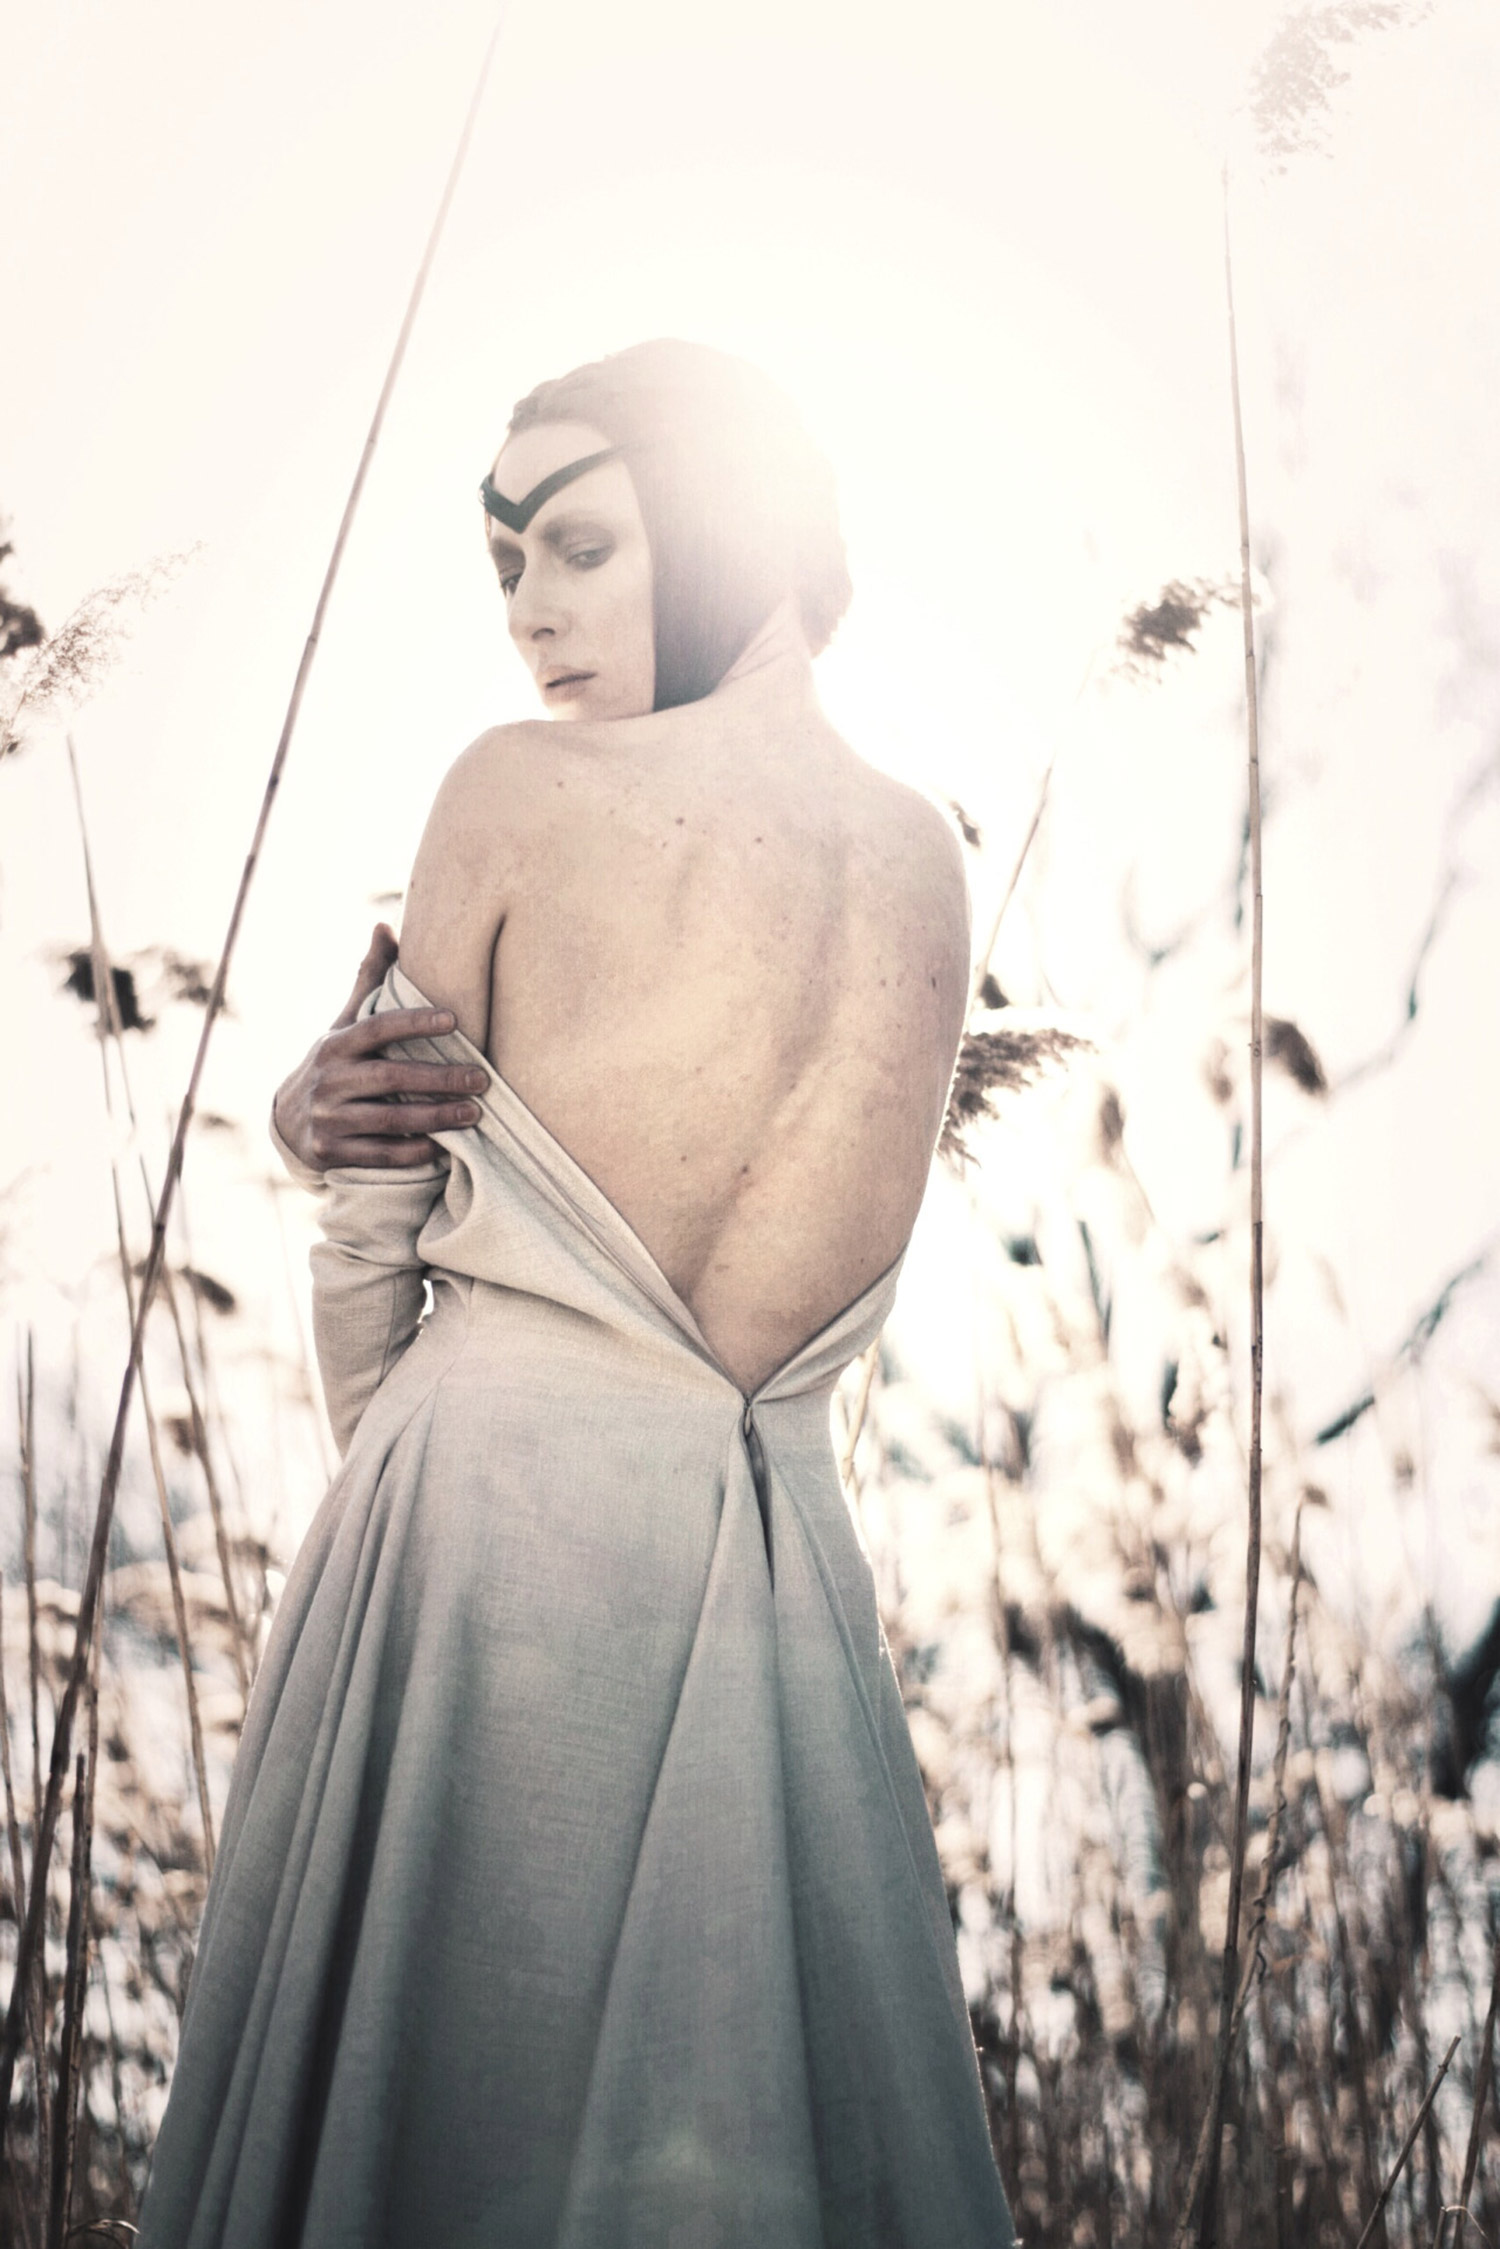 Hogan Mclaughlin - Upon the Heath of Bedlam, photographer Bill Crisafi, white dress with open back